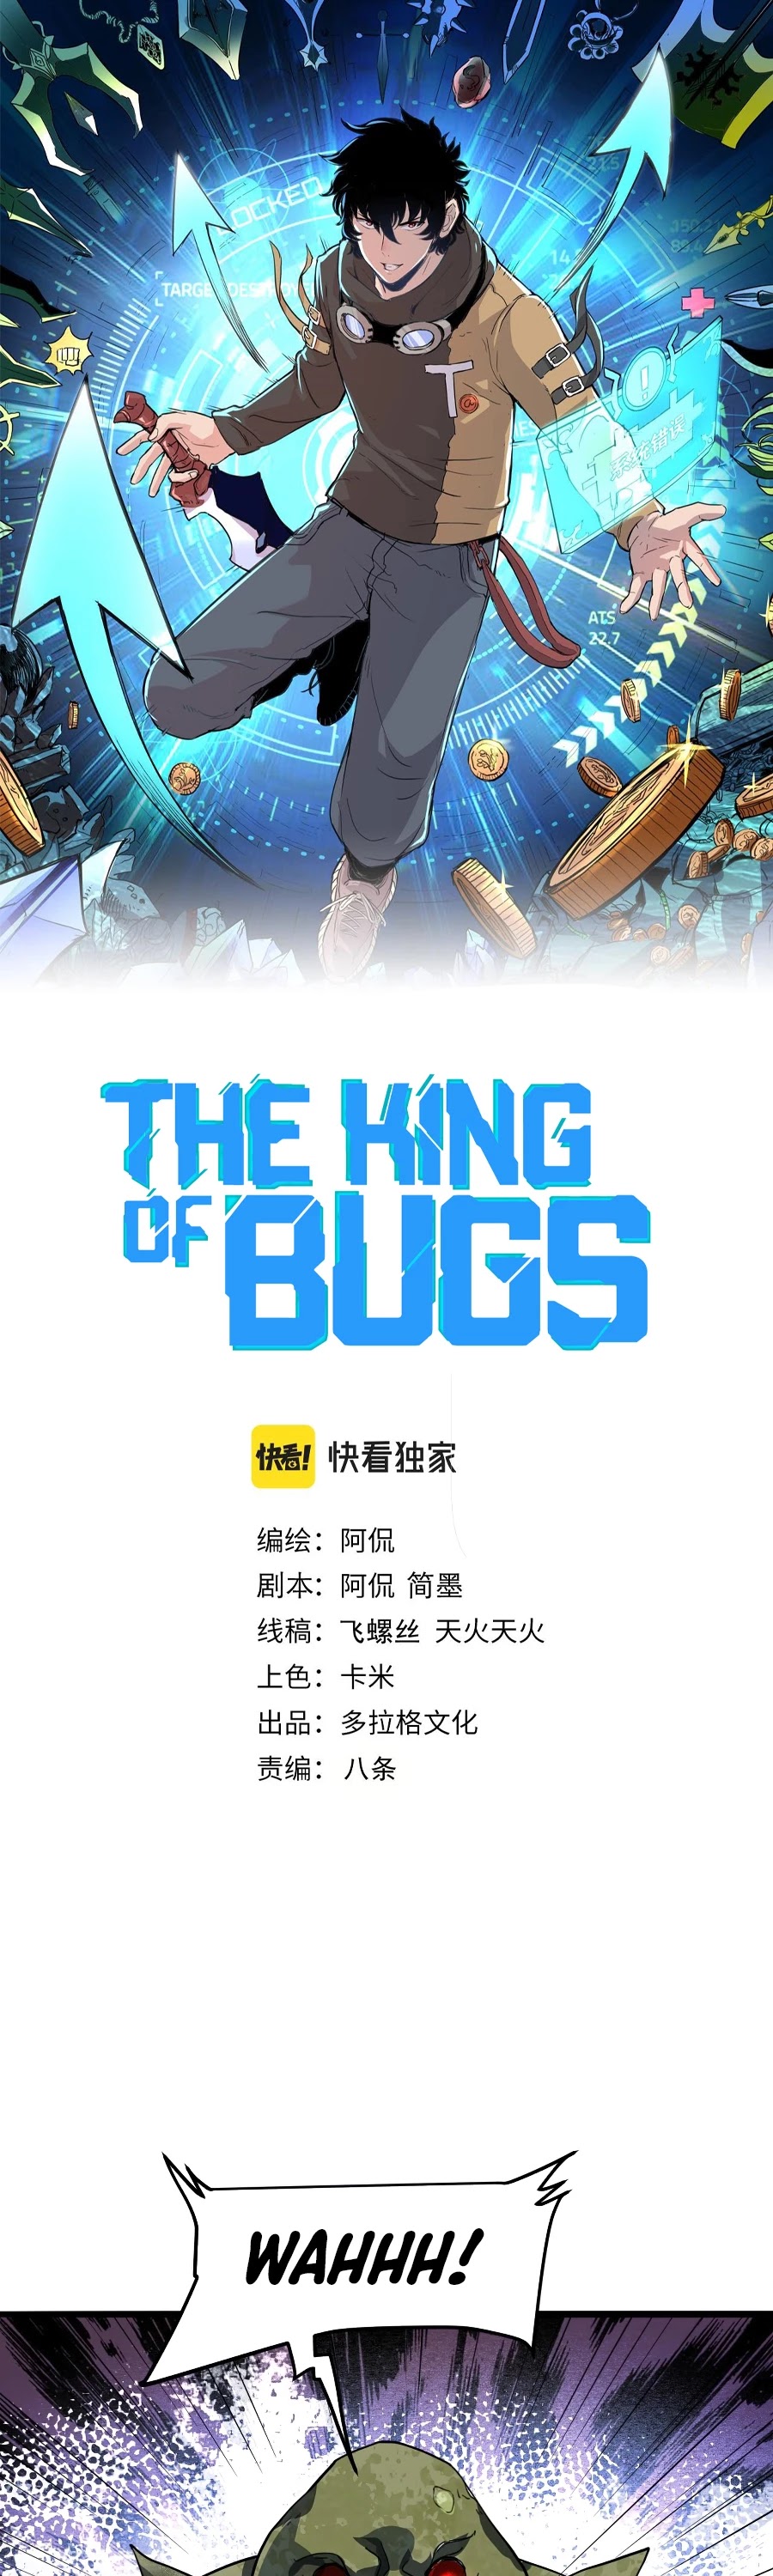 The King Of Bug - Page 2